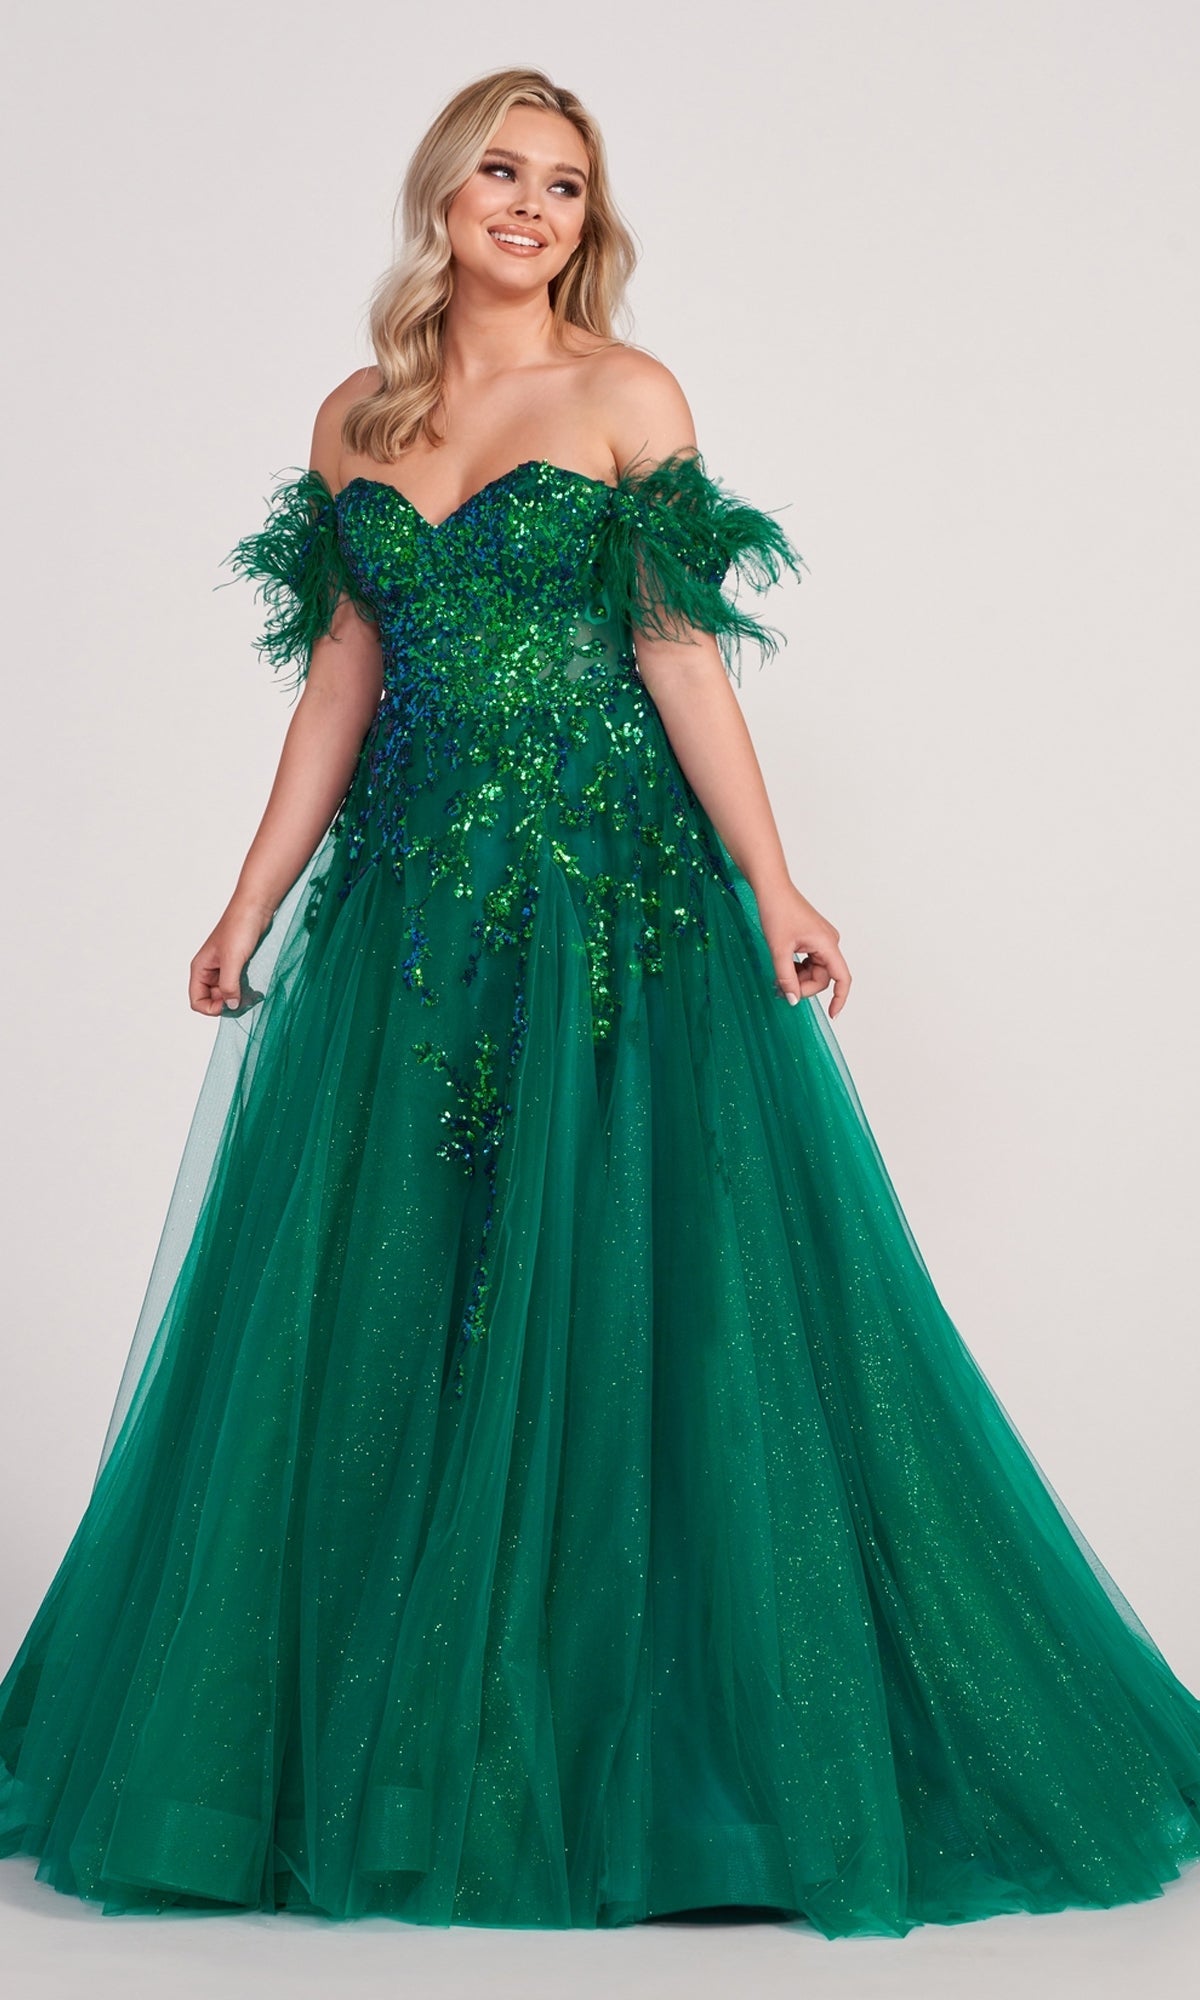 Emerald Ellie Wilde Ball Gown With Feather Off The Shoulder Details